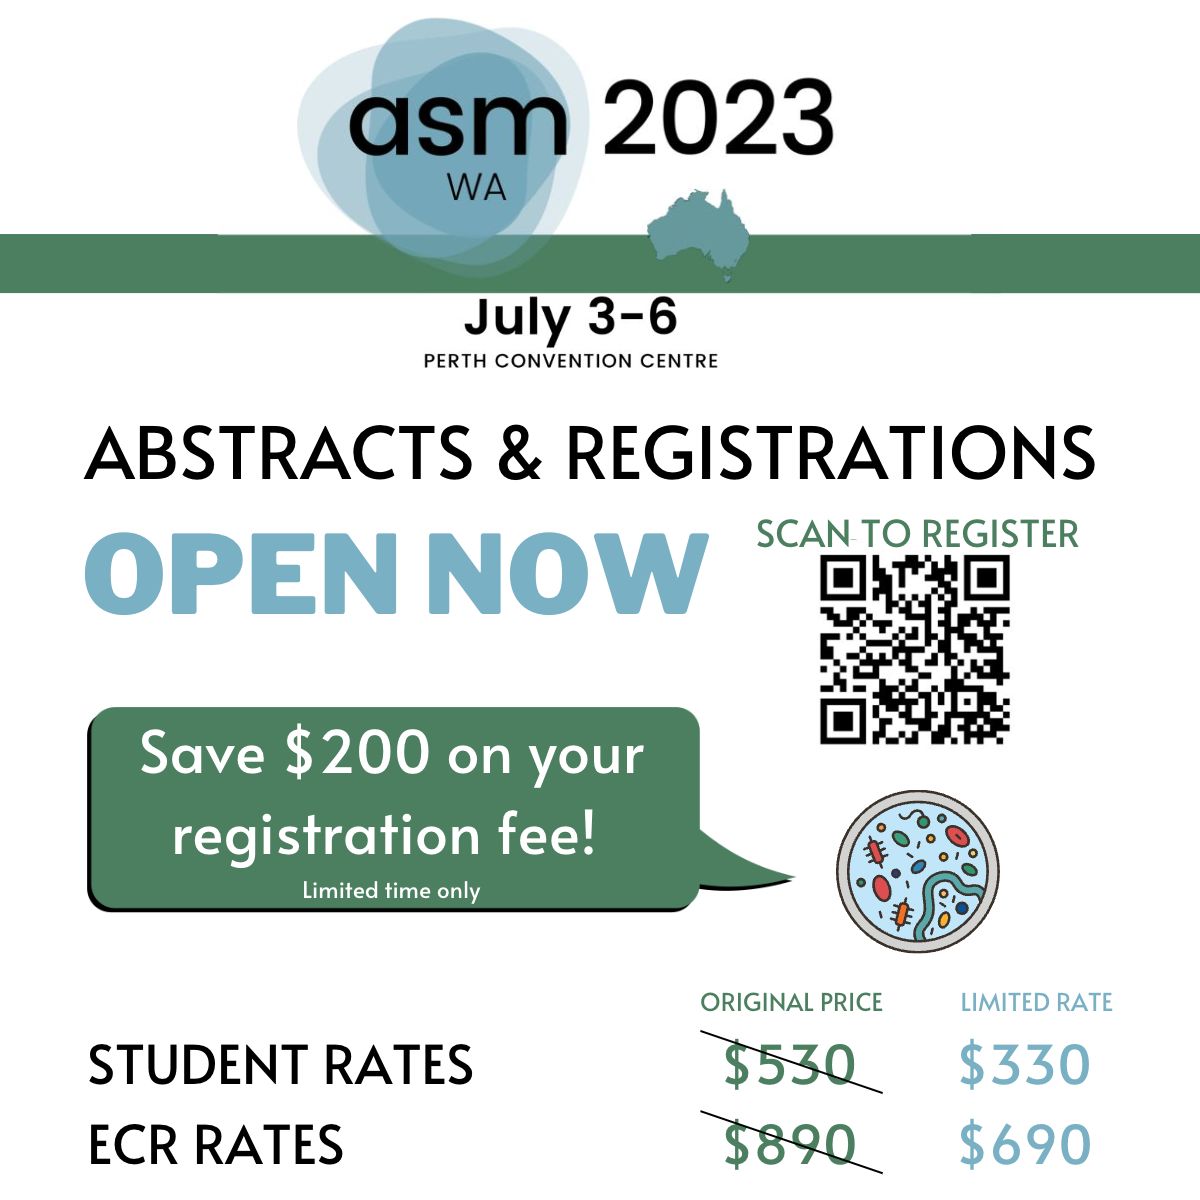 👉Registrations for ASM 2023 Annual Microbiology Conference are now open!⁣⁣ ⏰ #Students and #ECR's also have the chance to save $200 on your registration with our Early Bird special! ✅ Register now for #ASM2023 :members.asnevents.com.au/register/event…